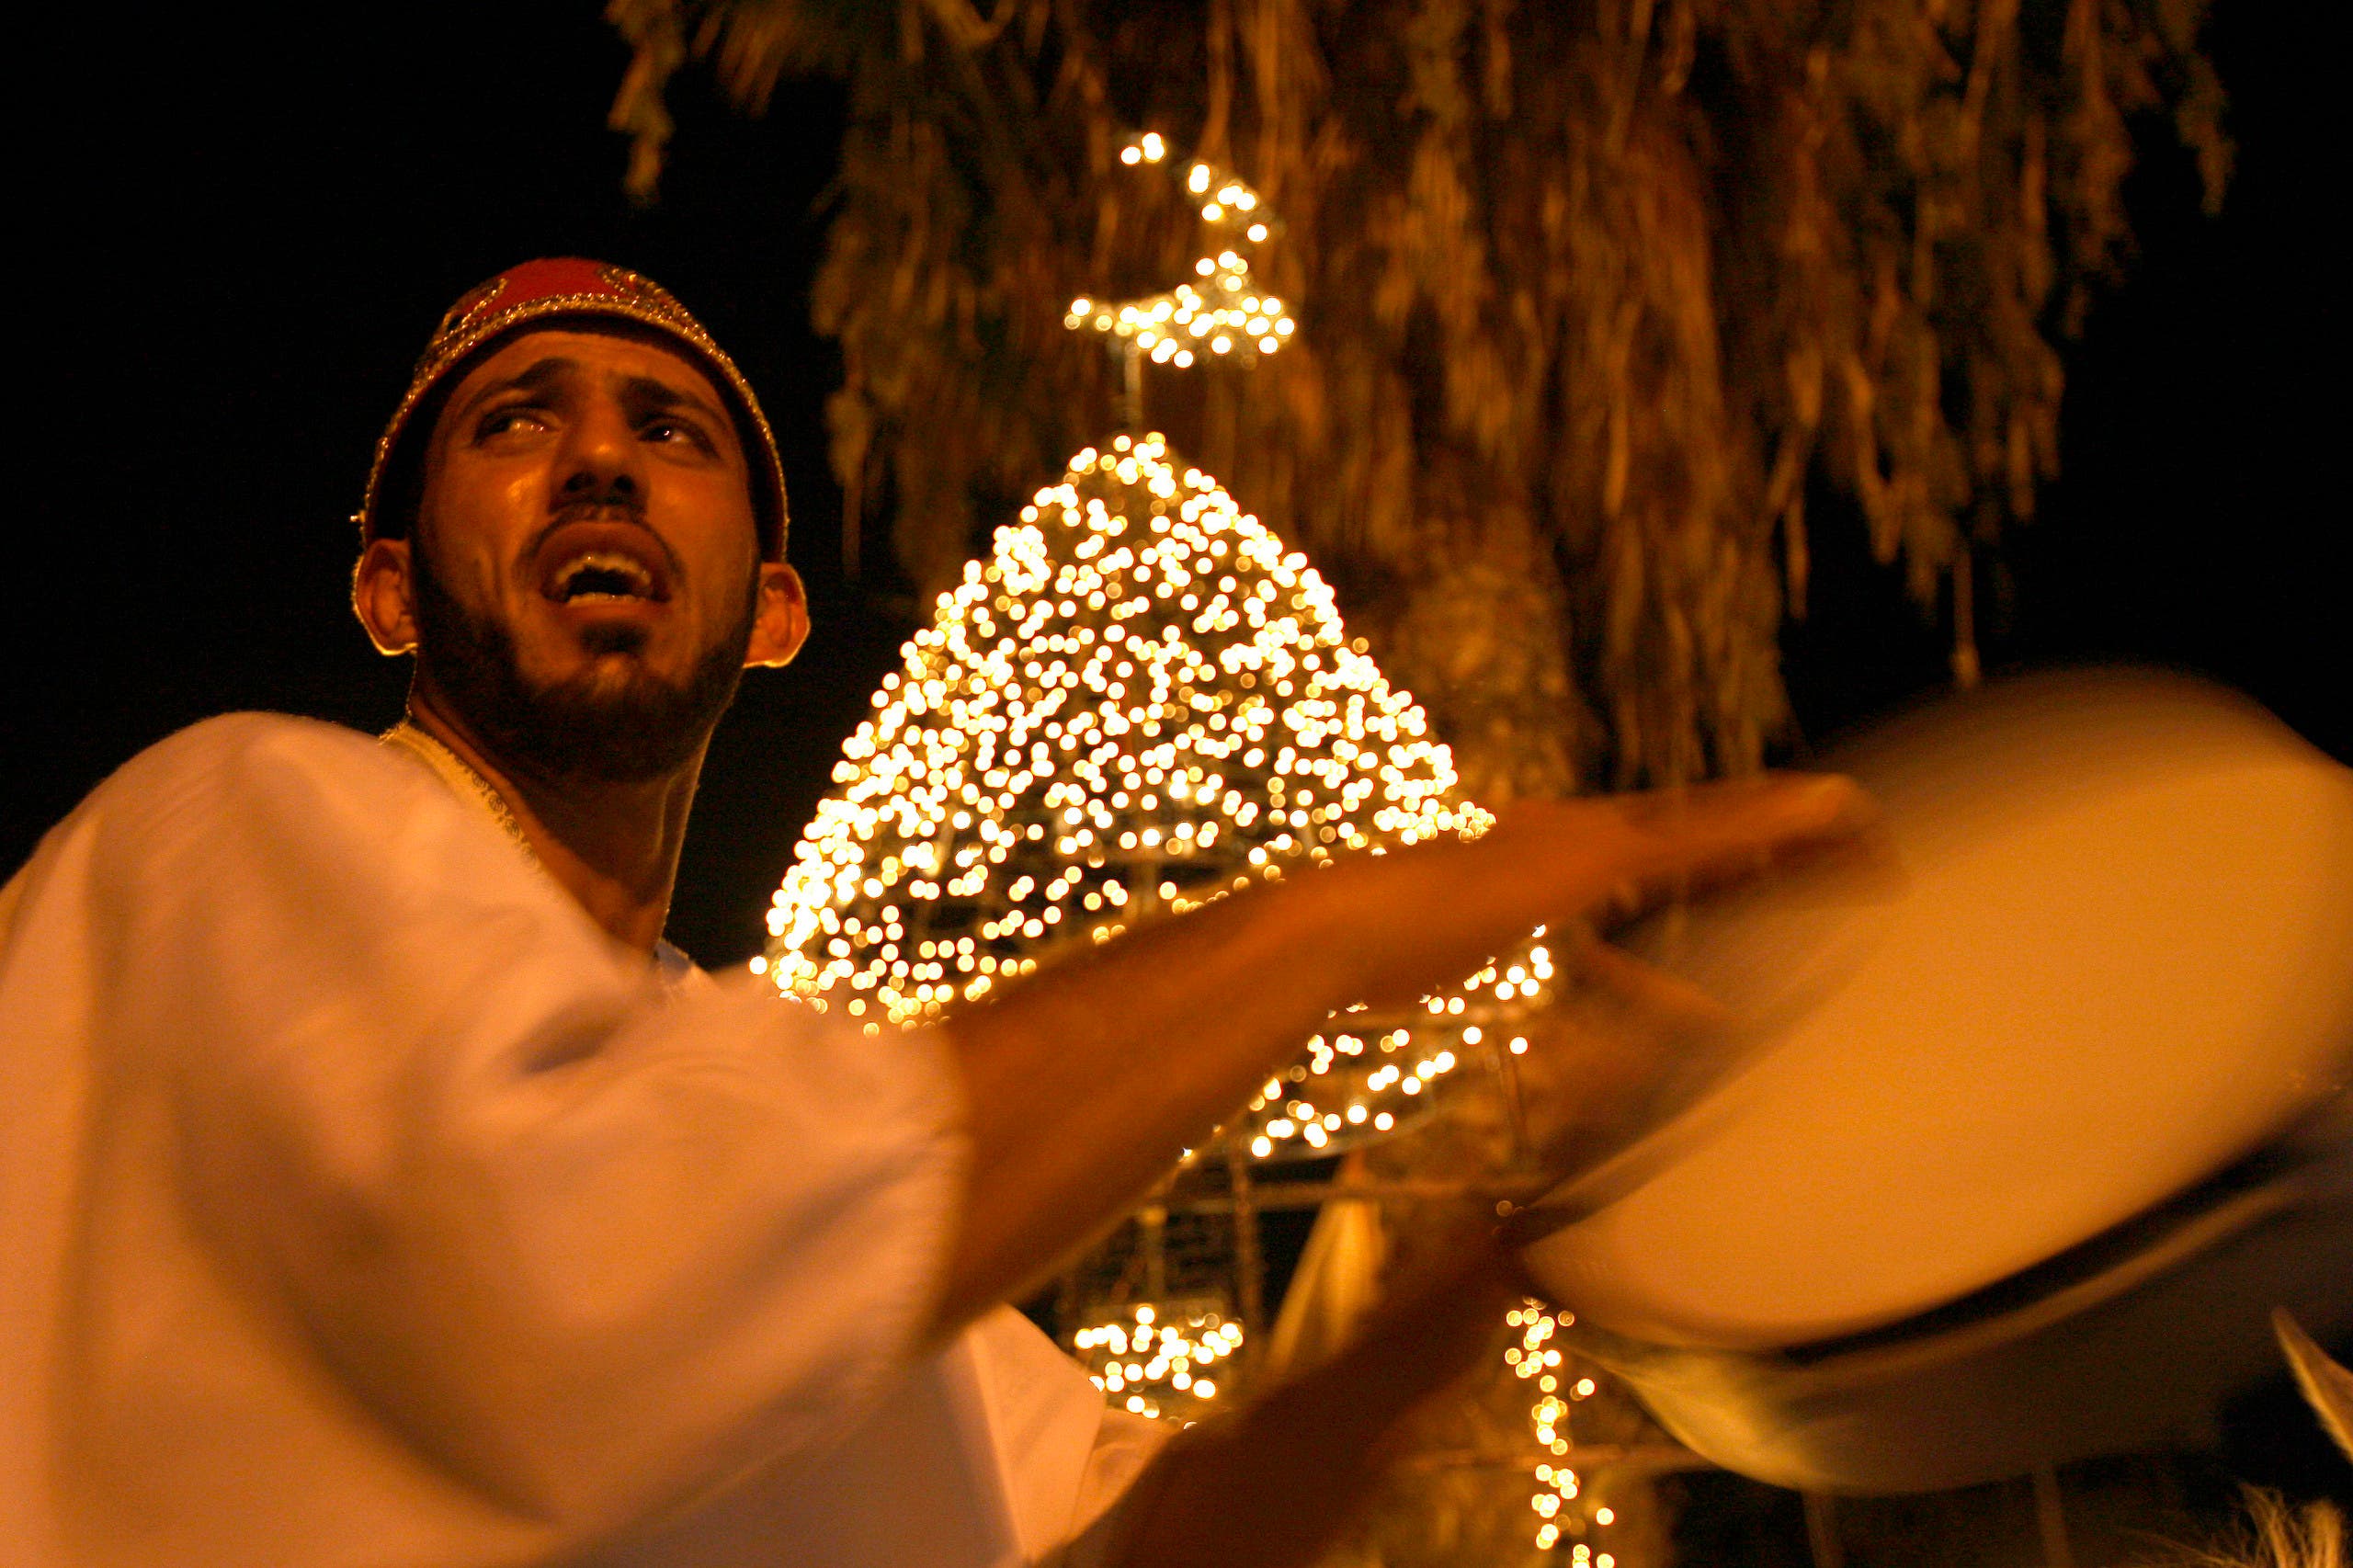 A Mesaharaty, or dawn awakener, strikes his drum to wake observant Muslims for their overnight 'sahur', or last meal, before the day's fast in Sidon's Old City in southern Lebanon just before dawn August 27, 2010.